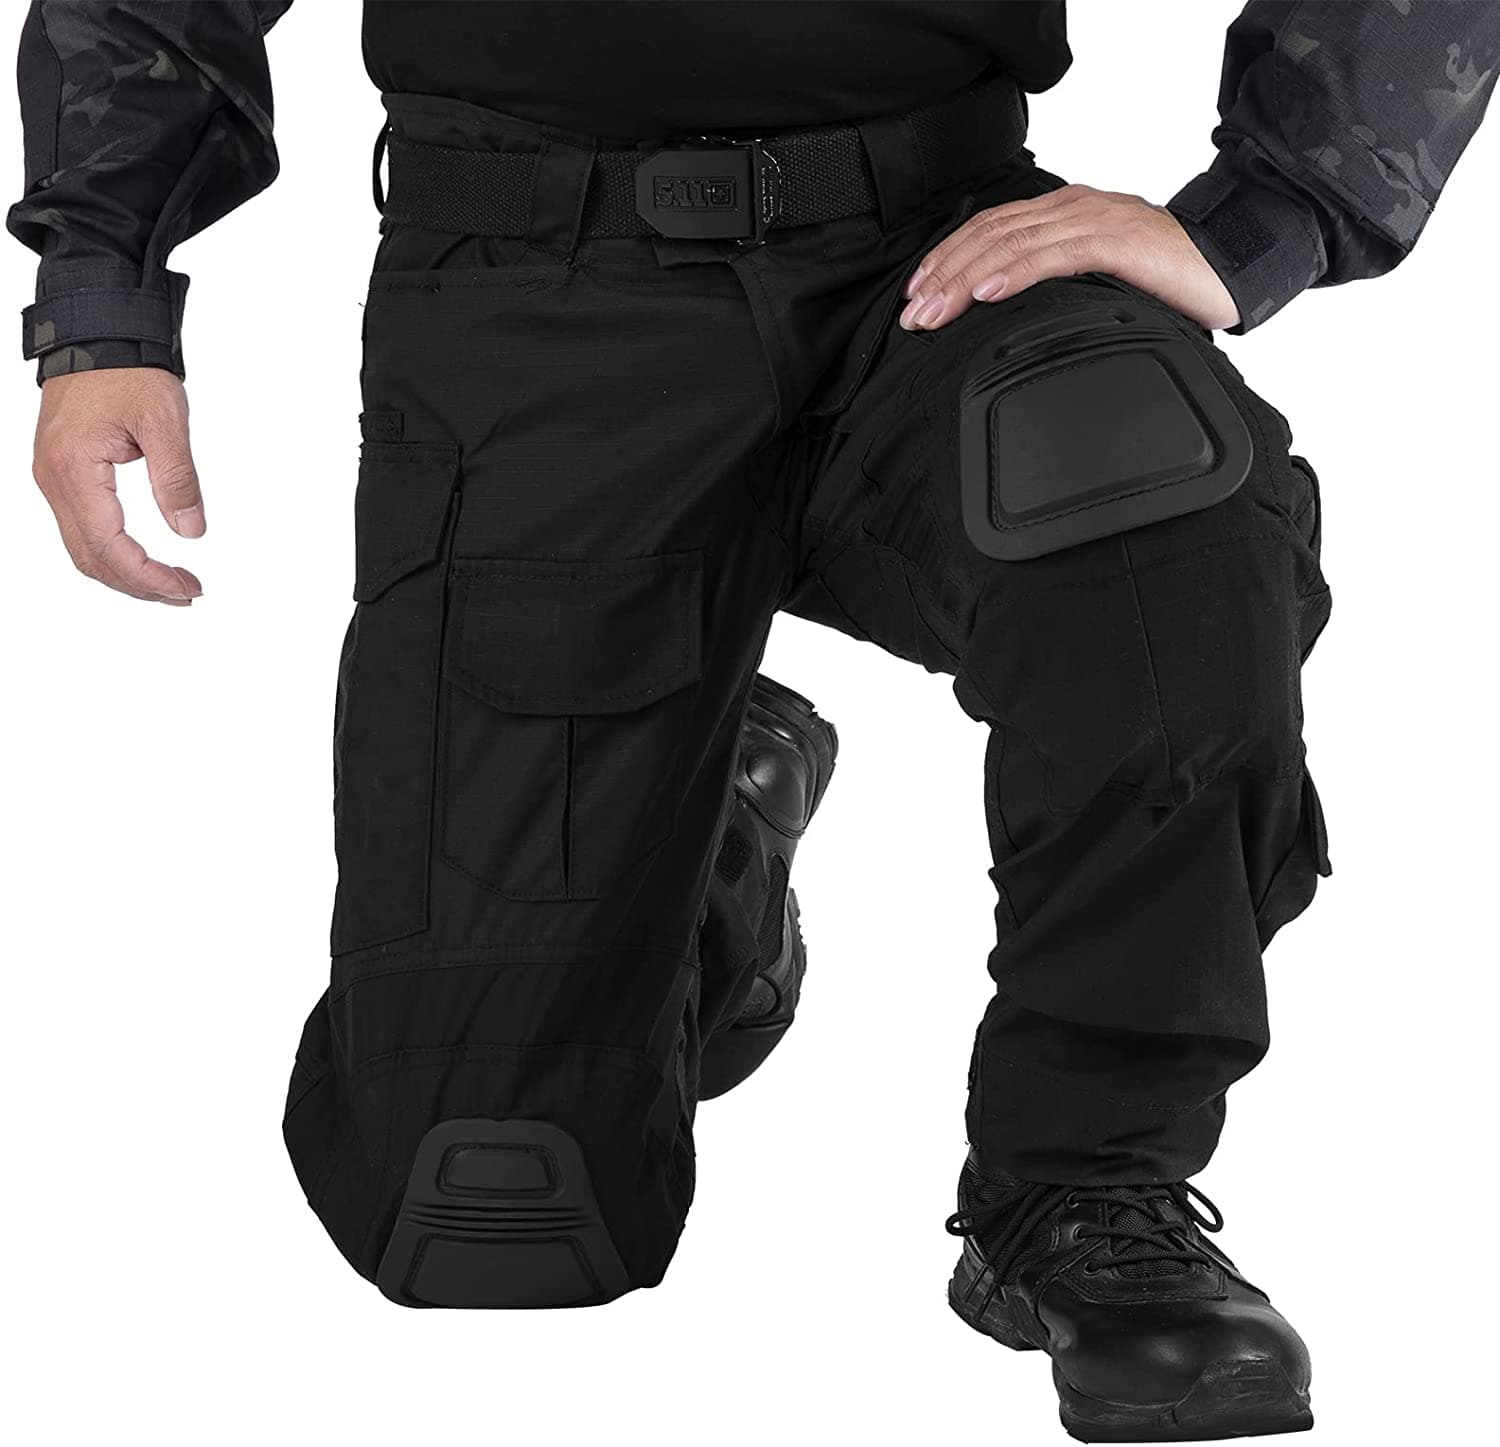 Military Airsoft Uniforms G3 Pants With Knee Pads